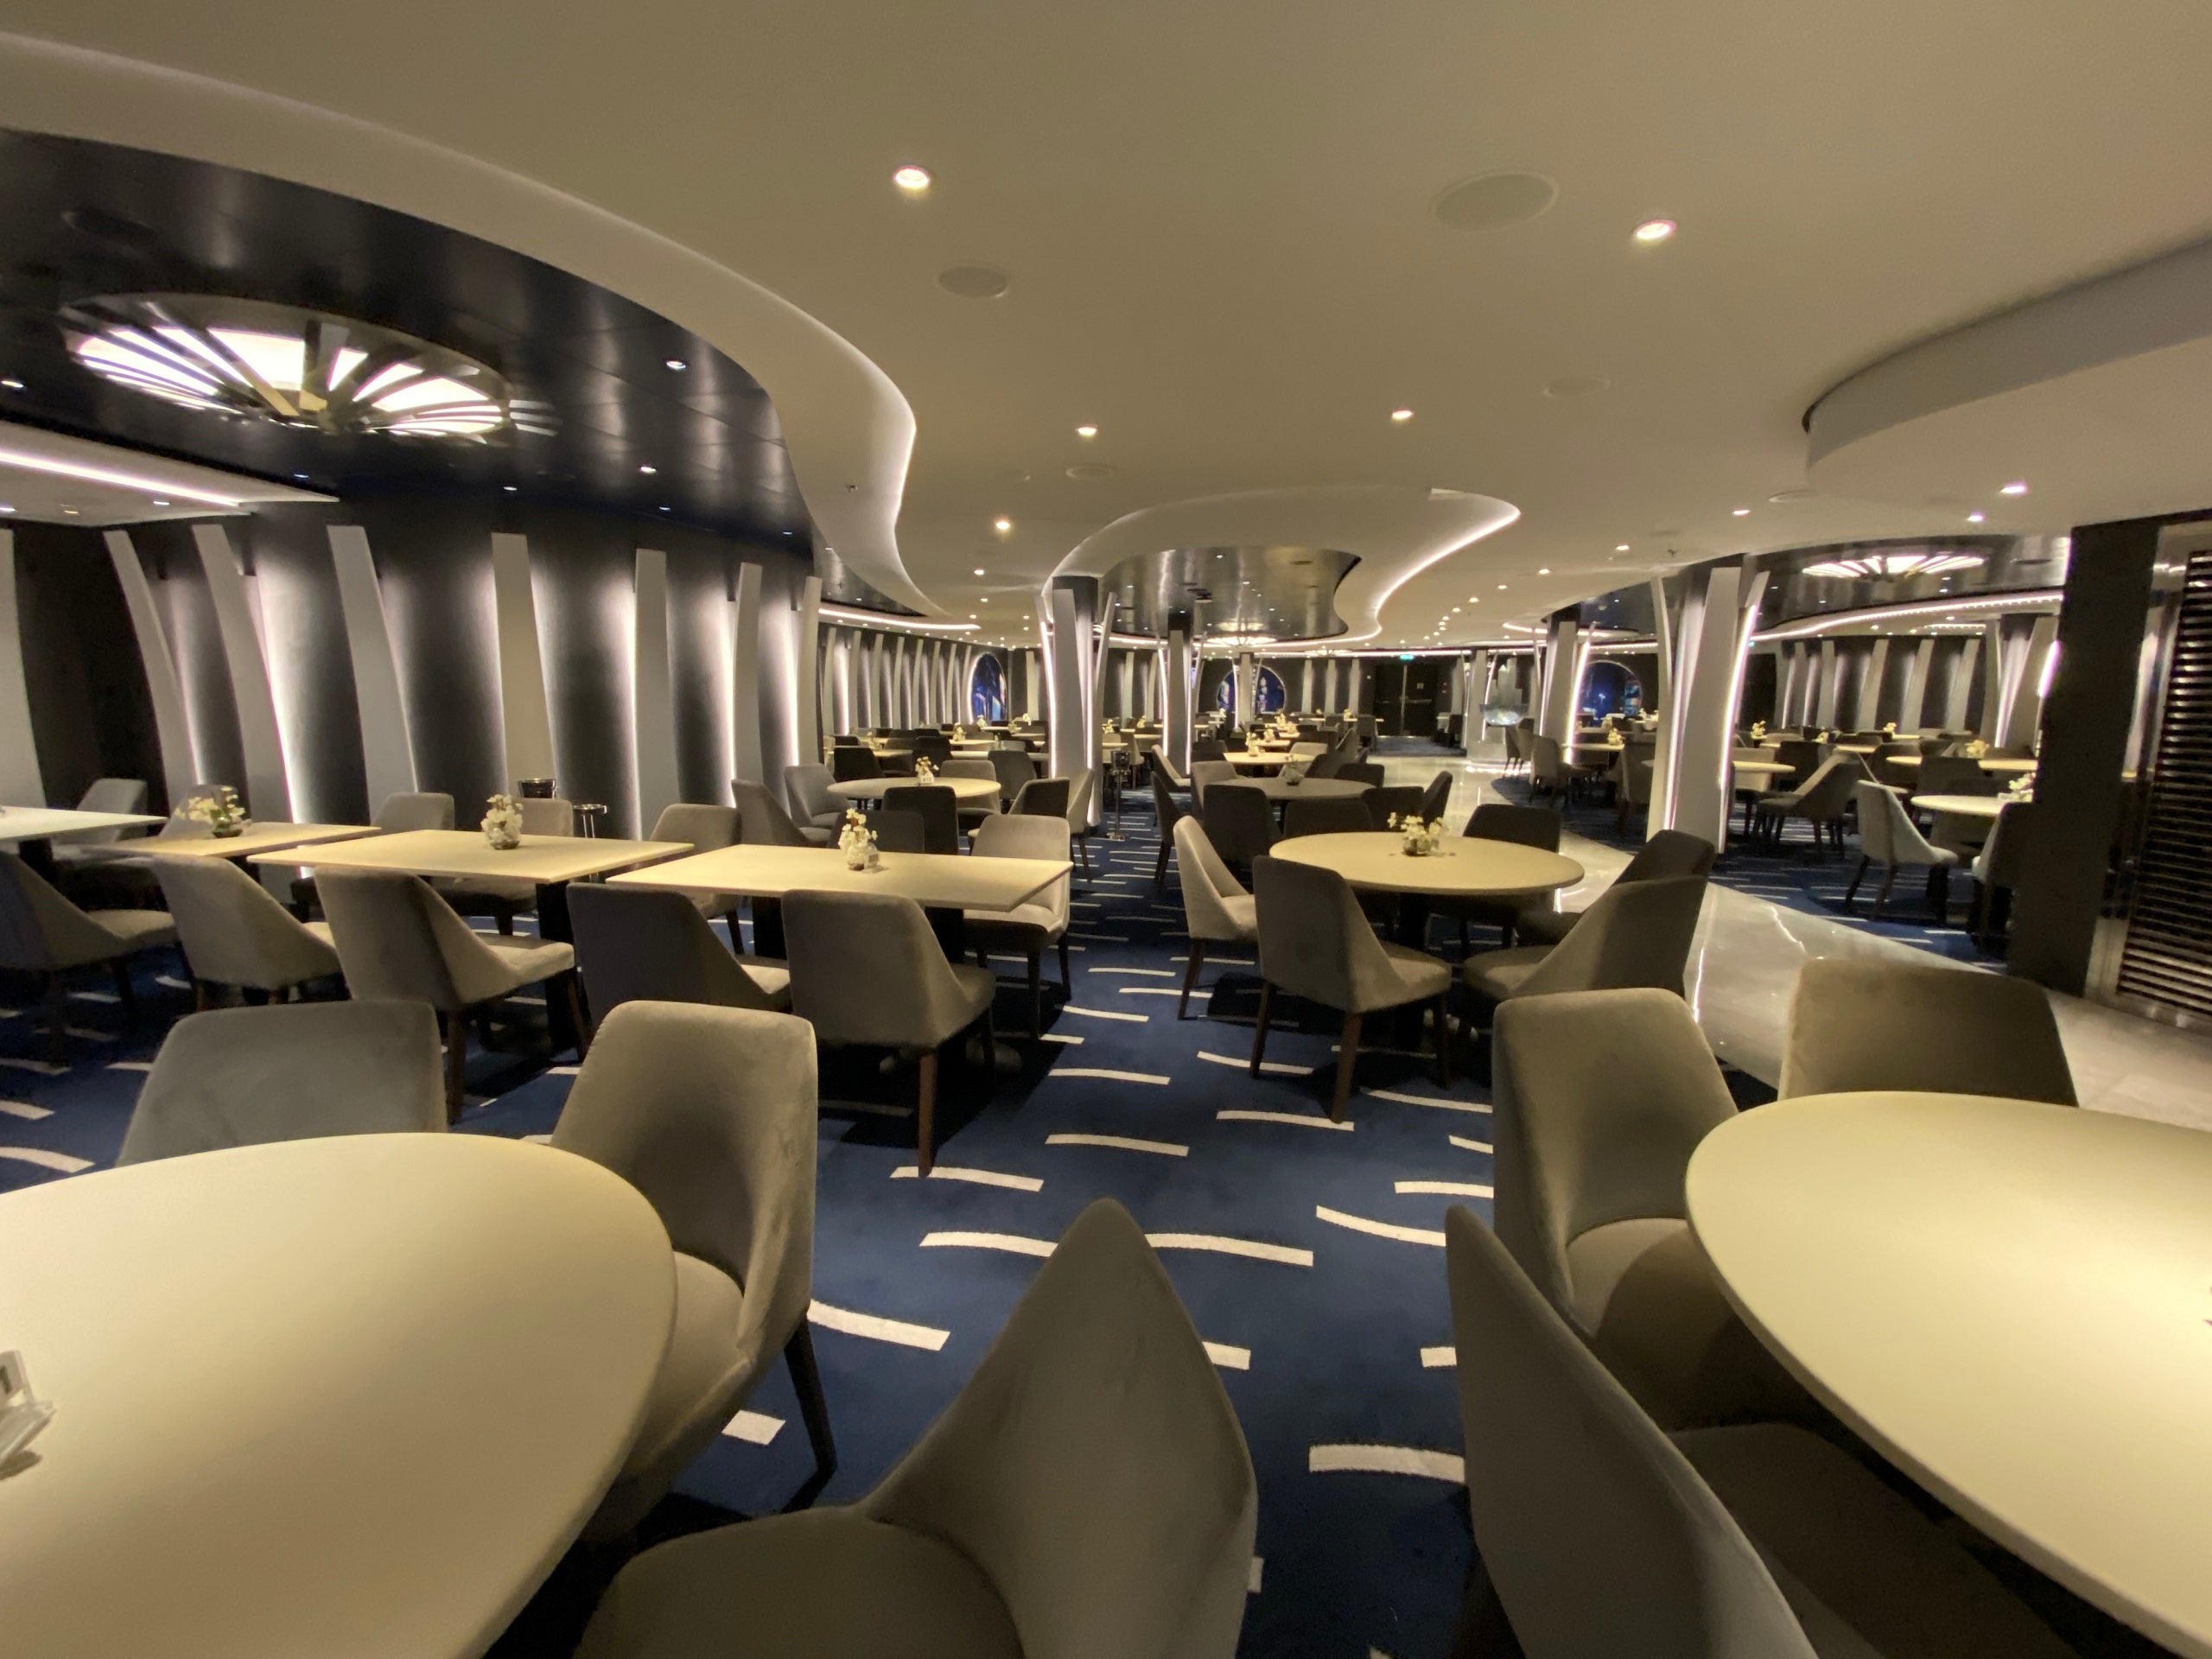 msc cruises first ship class are